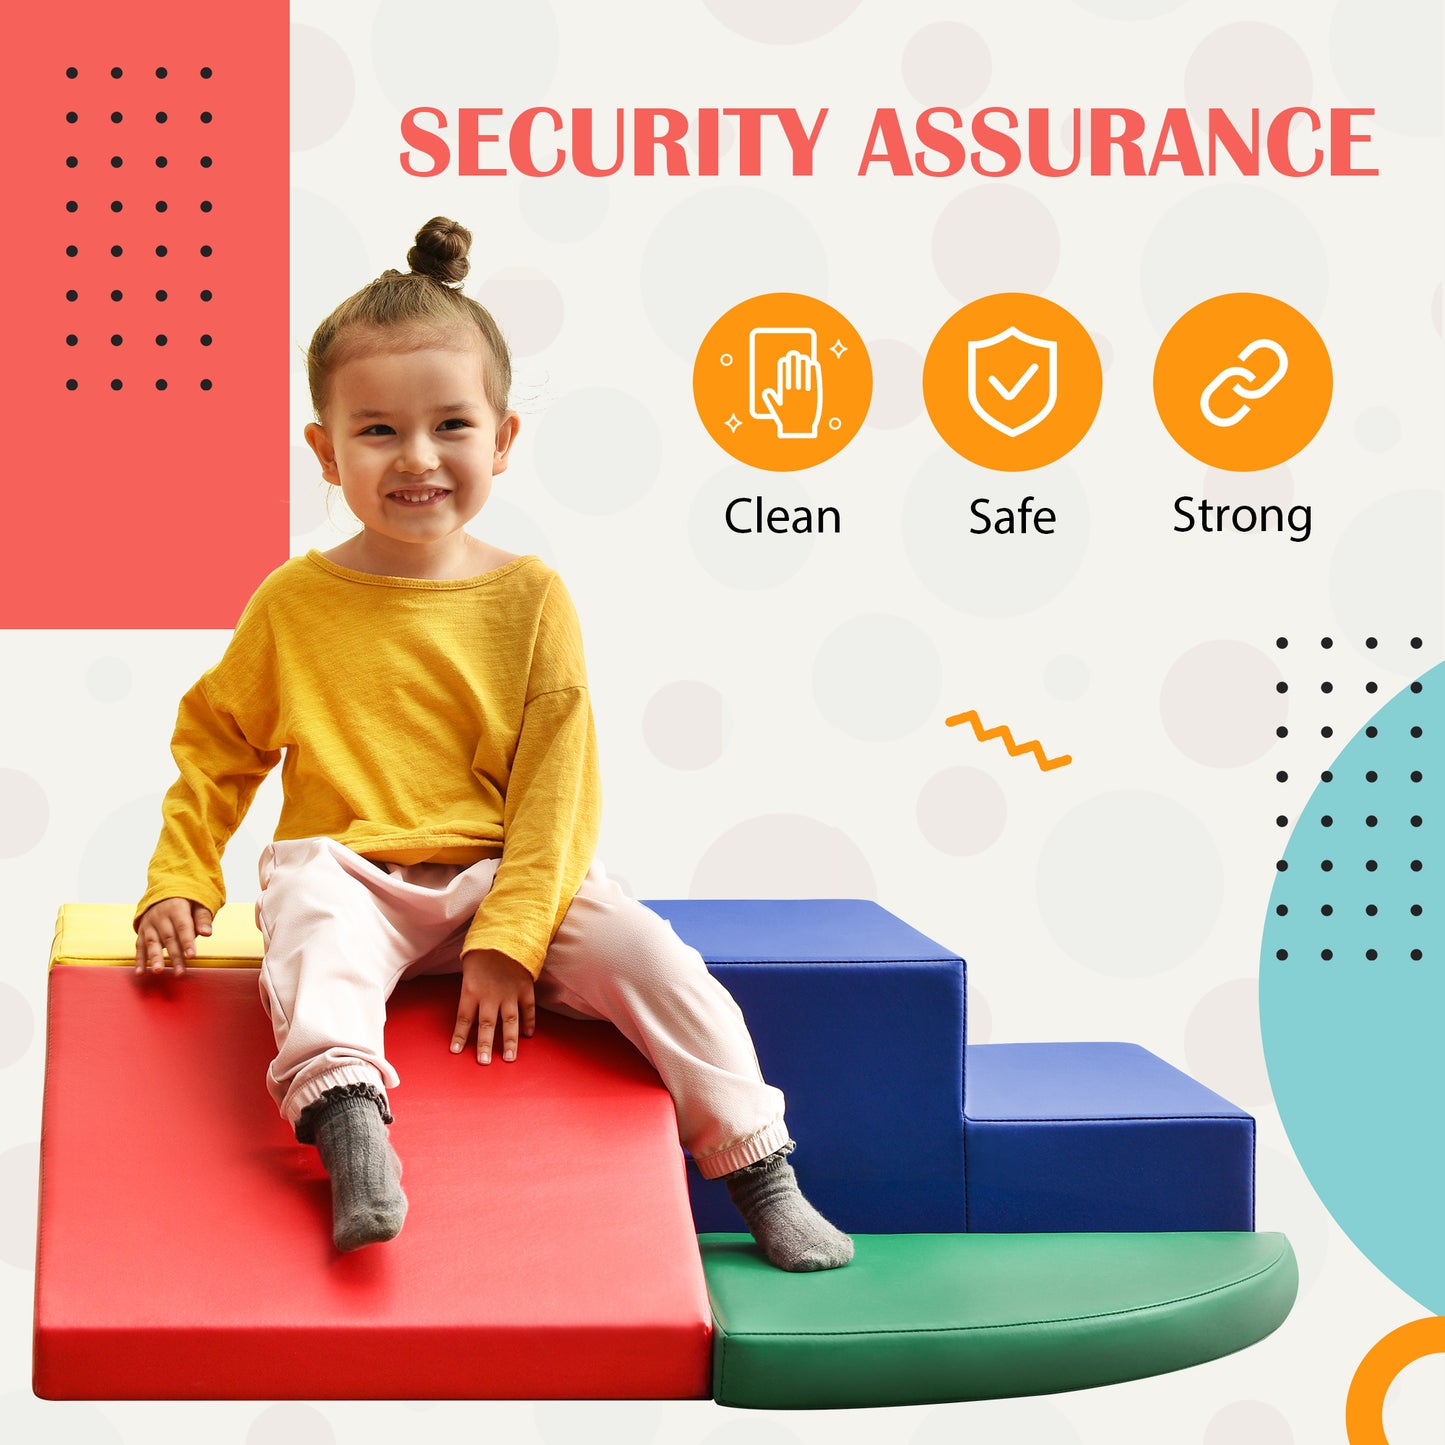 Soft Climb and Crawl Foam Playset, Safe Soft Foam Nugget Block for Infants, Preschools, Toddlers, Kids Crawling and Climbing Indoor Active Play Structure